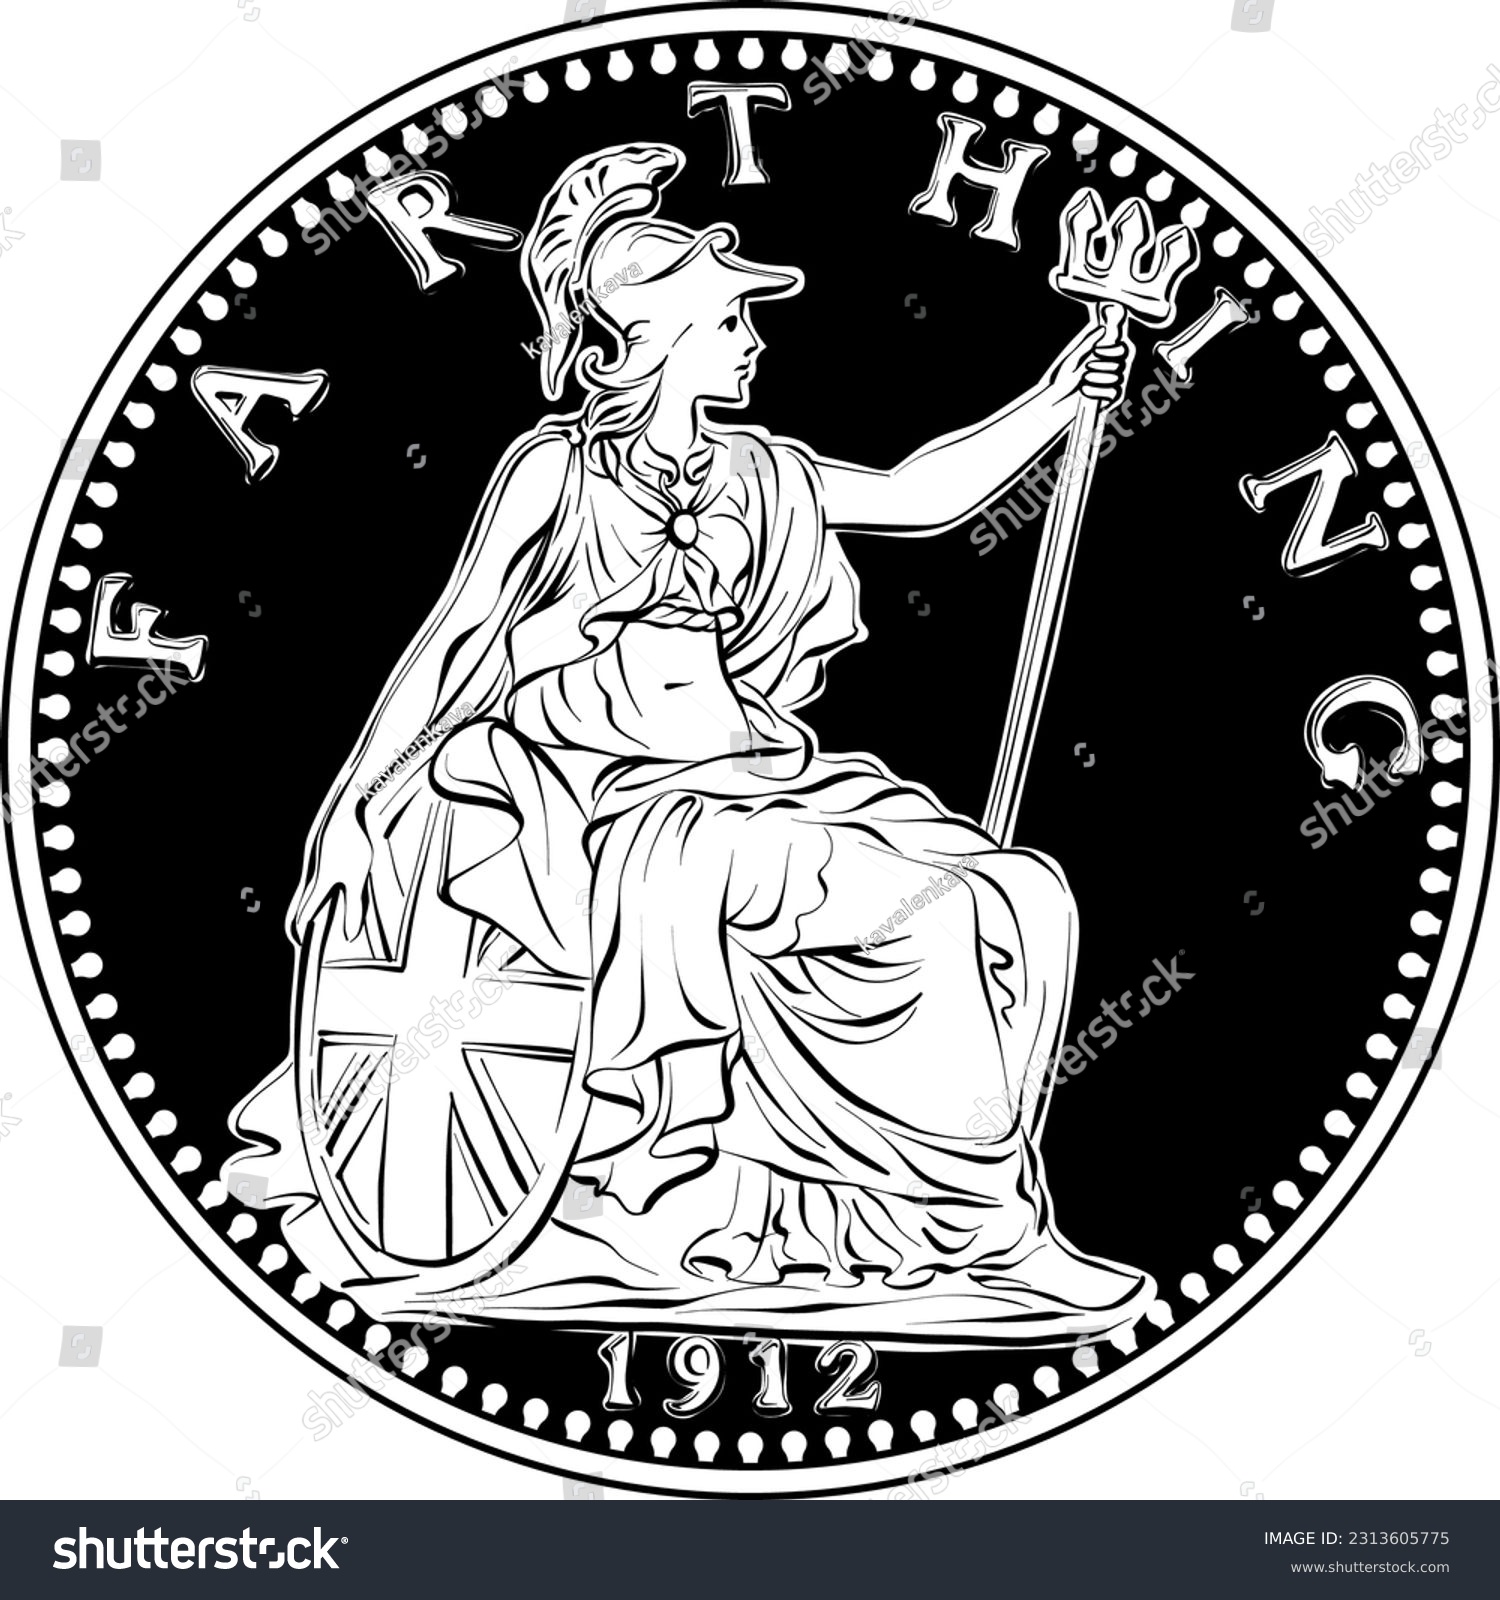 SVG of Vector money coin British farthing, Britannia on reverse. Black and white svg